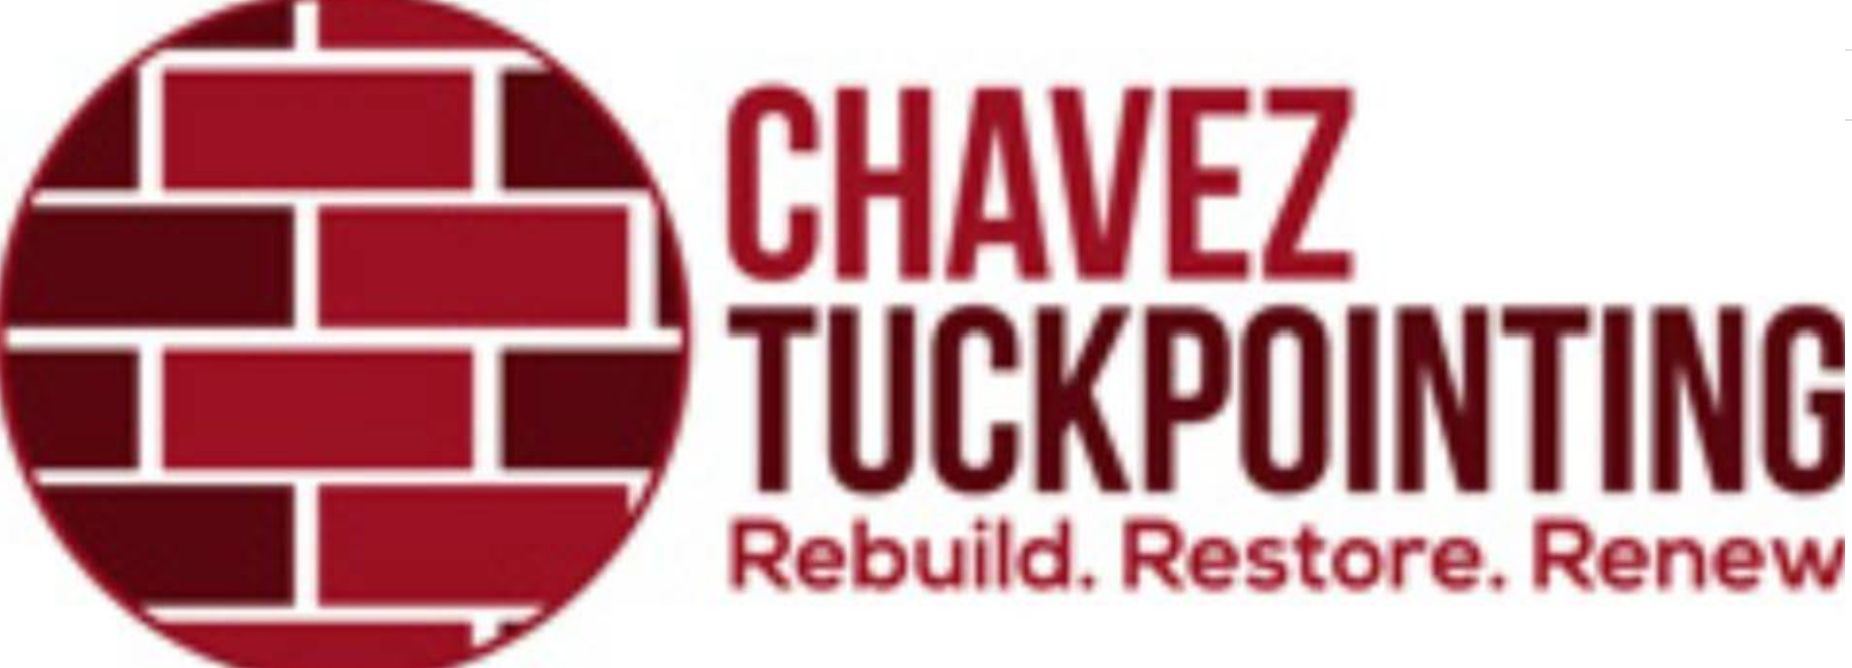 Chavez Tuckpointing Logo